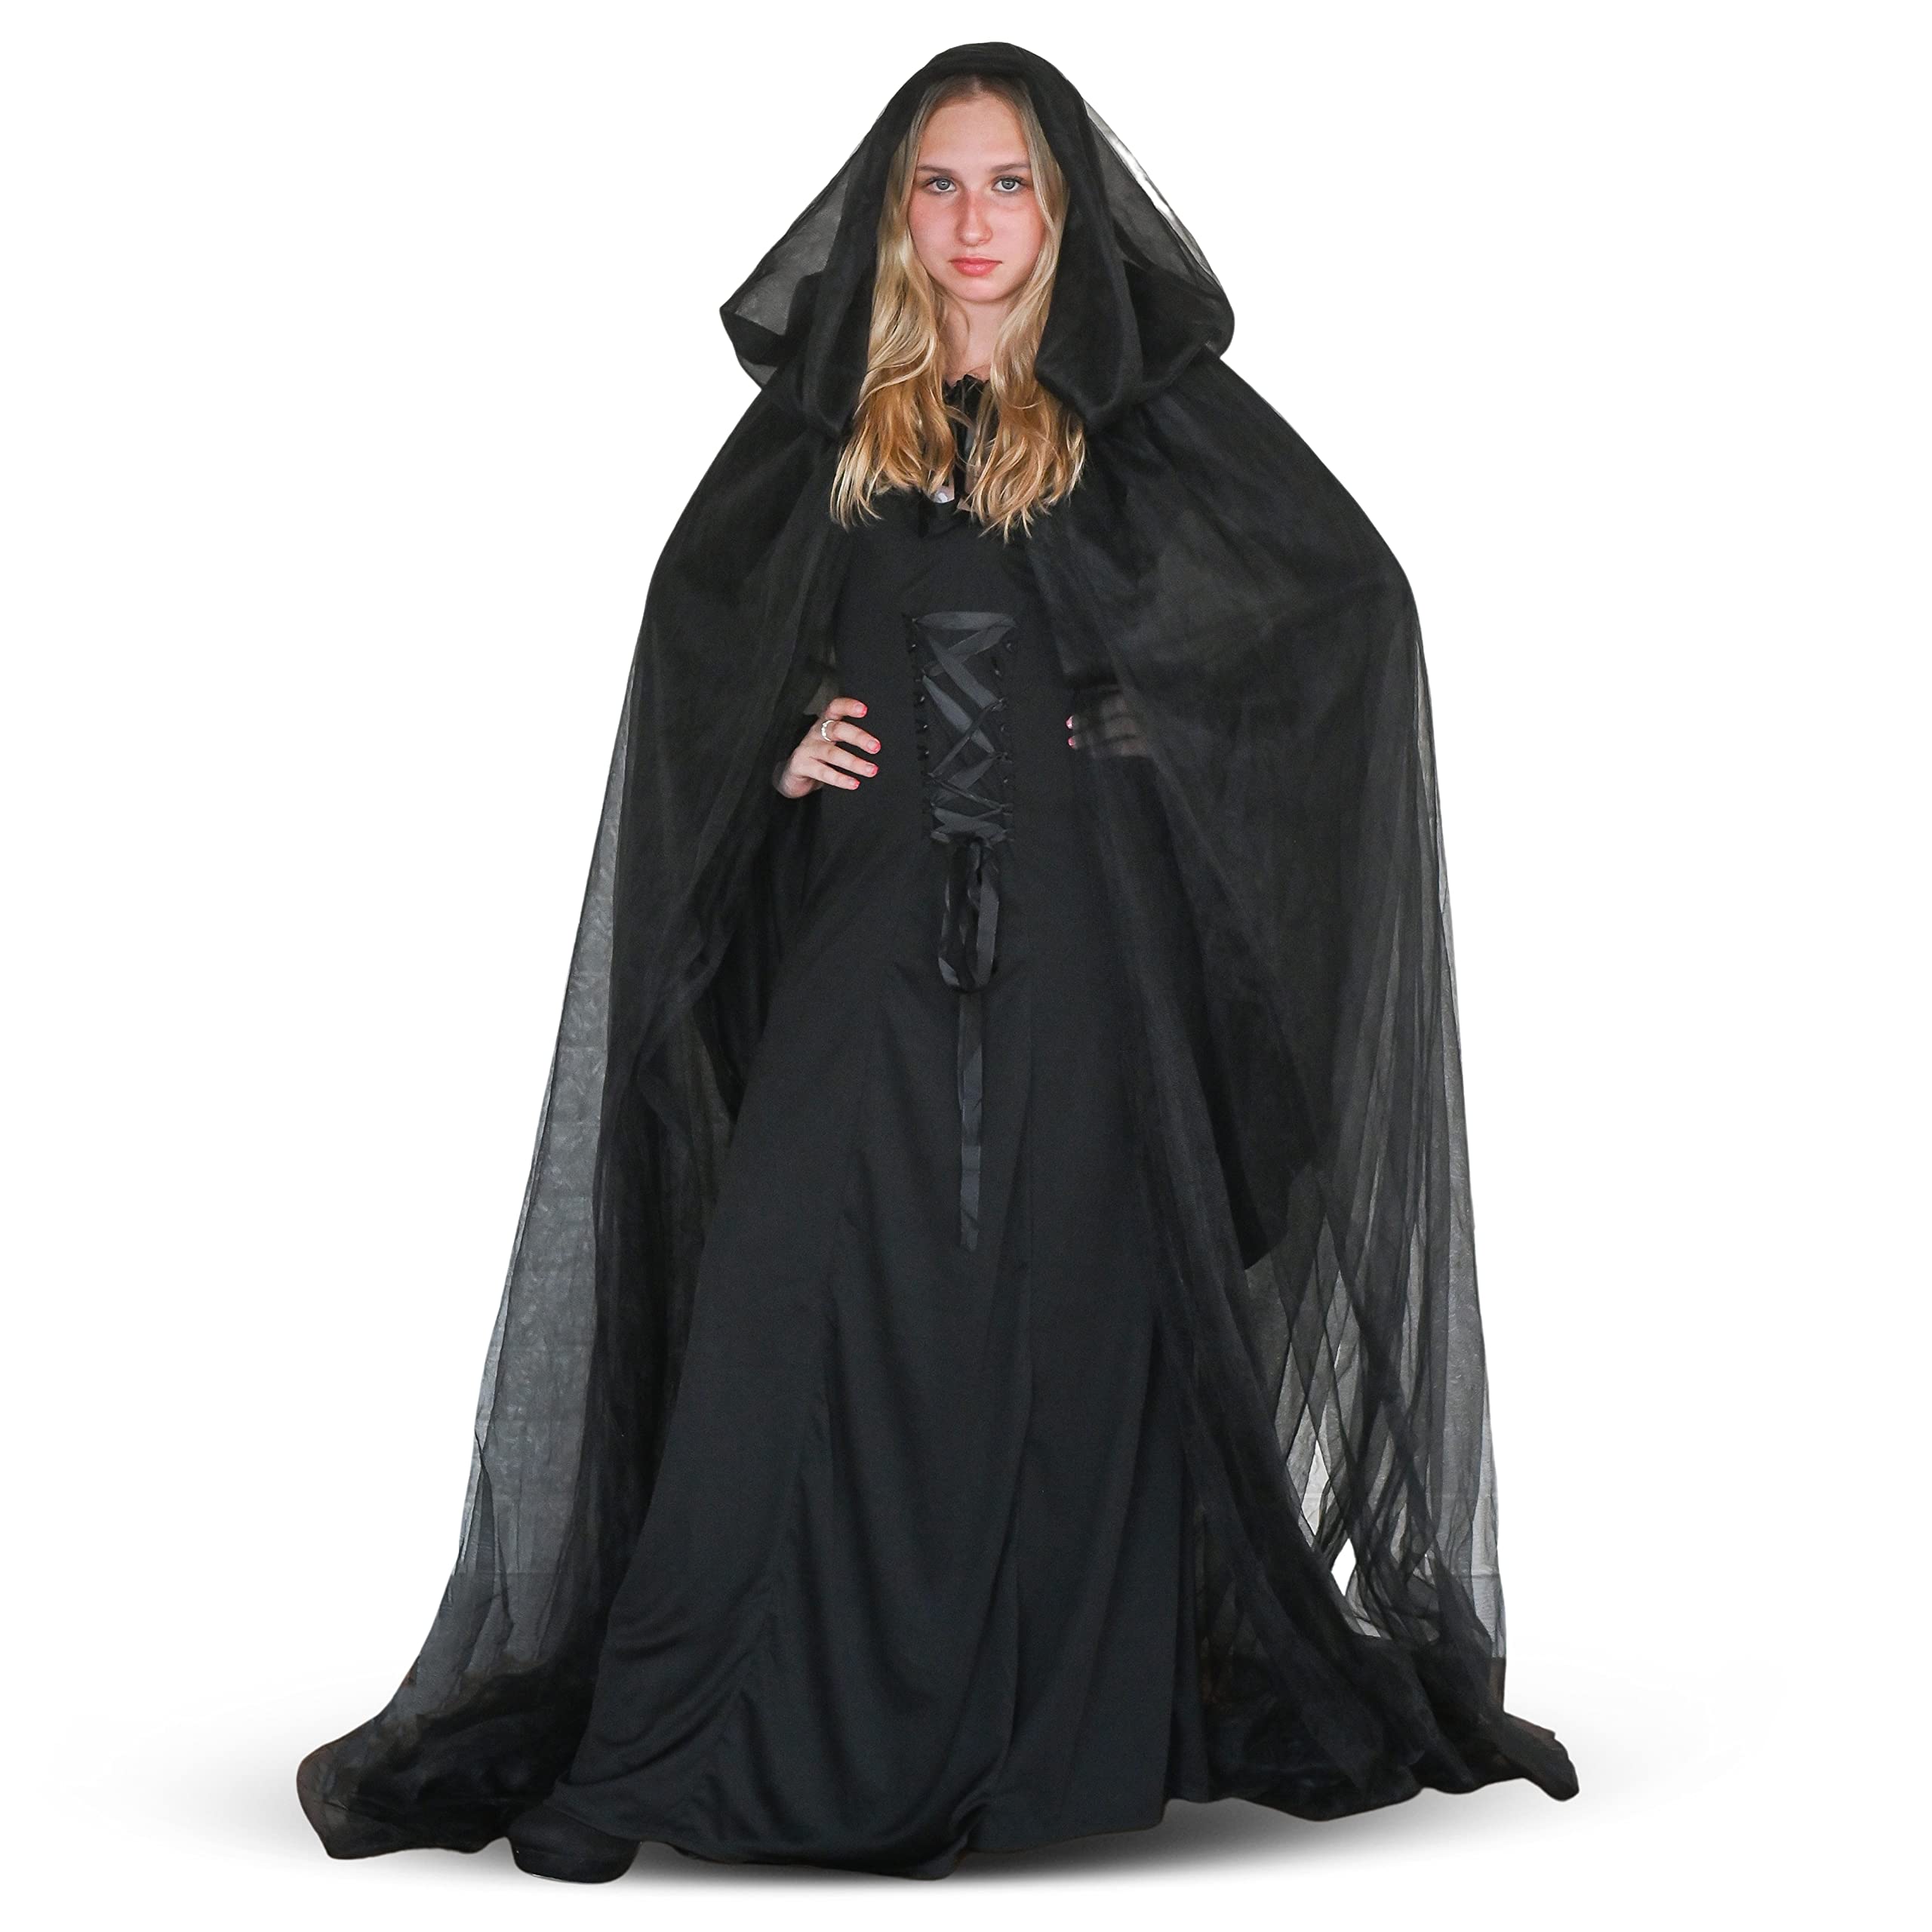 Tulle Cape Witch Costume for Women,Sheer Lace Black Hooded Cloak  Robe,Vampire Cape Costume Women,Gothic Plus Size Witches Costume,Halloween  Costumes